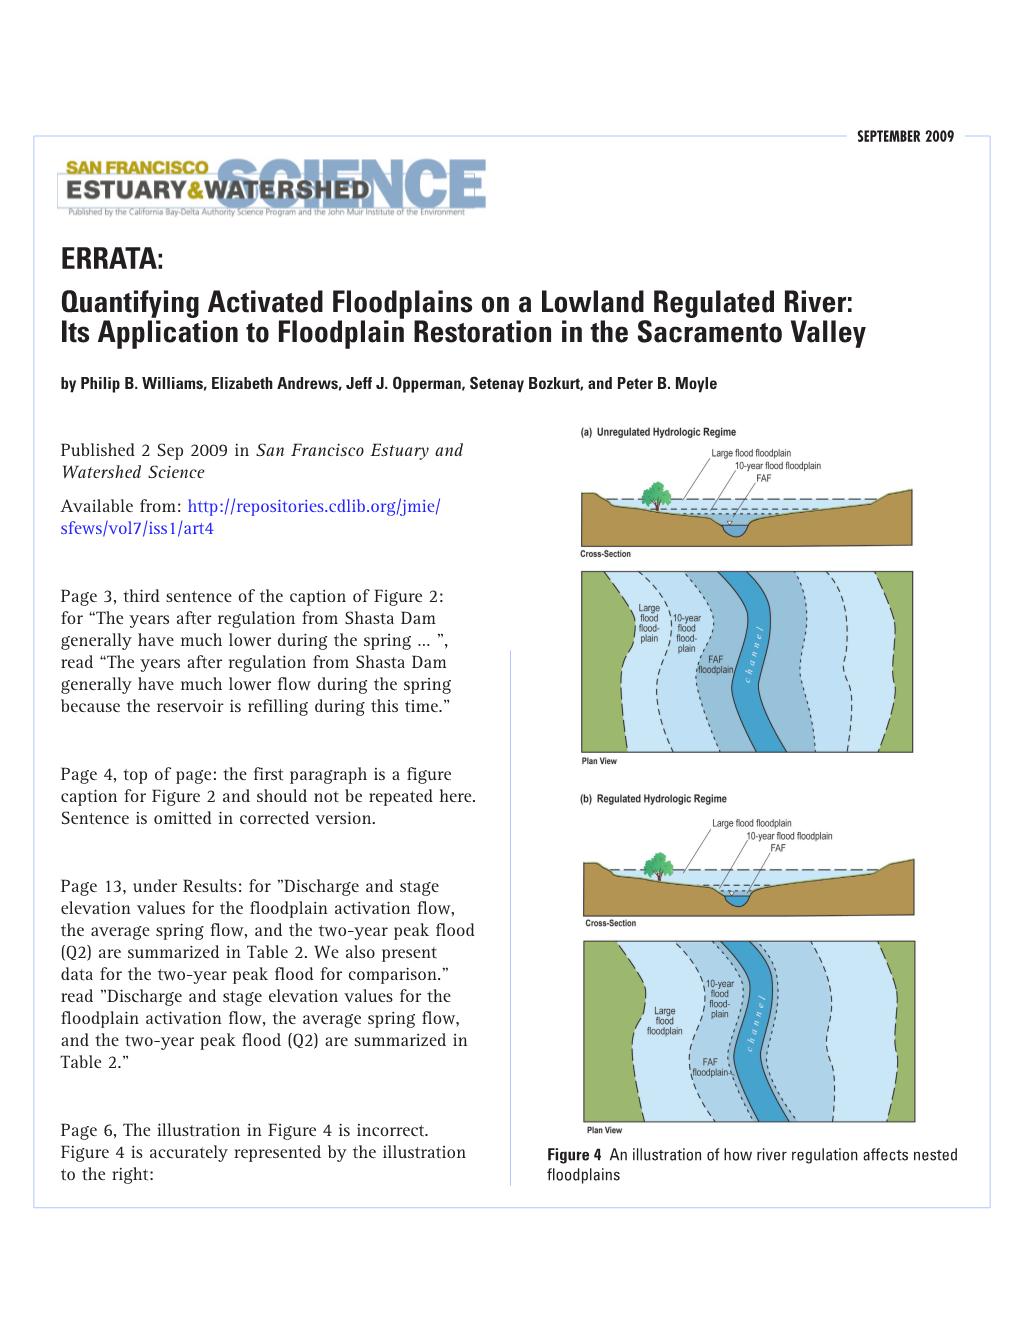 Its Application to Floodplain Restoration in the Sacramento Valley by Philip B